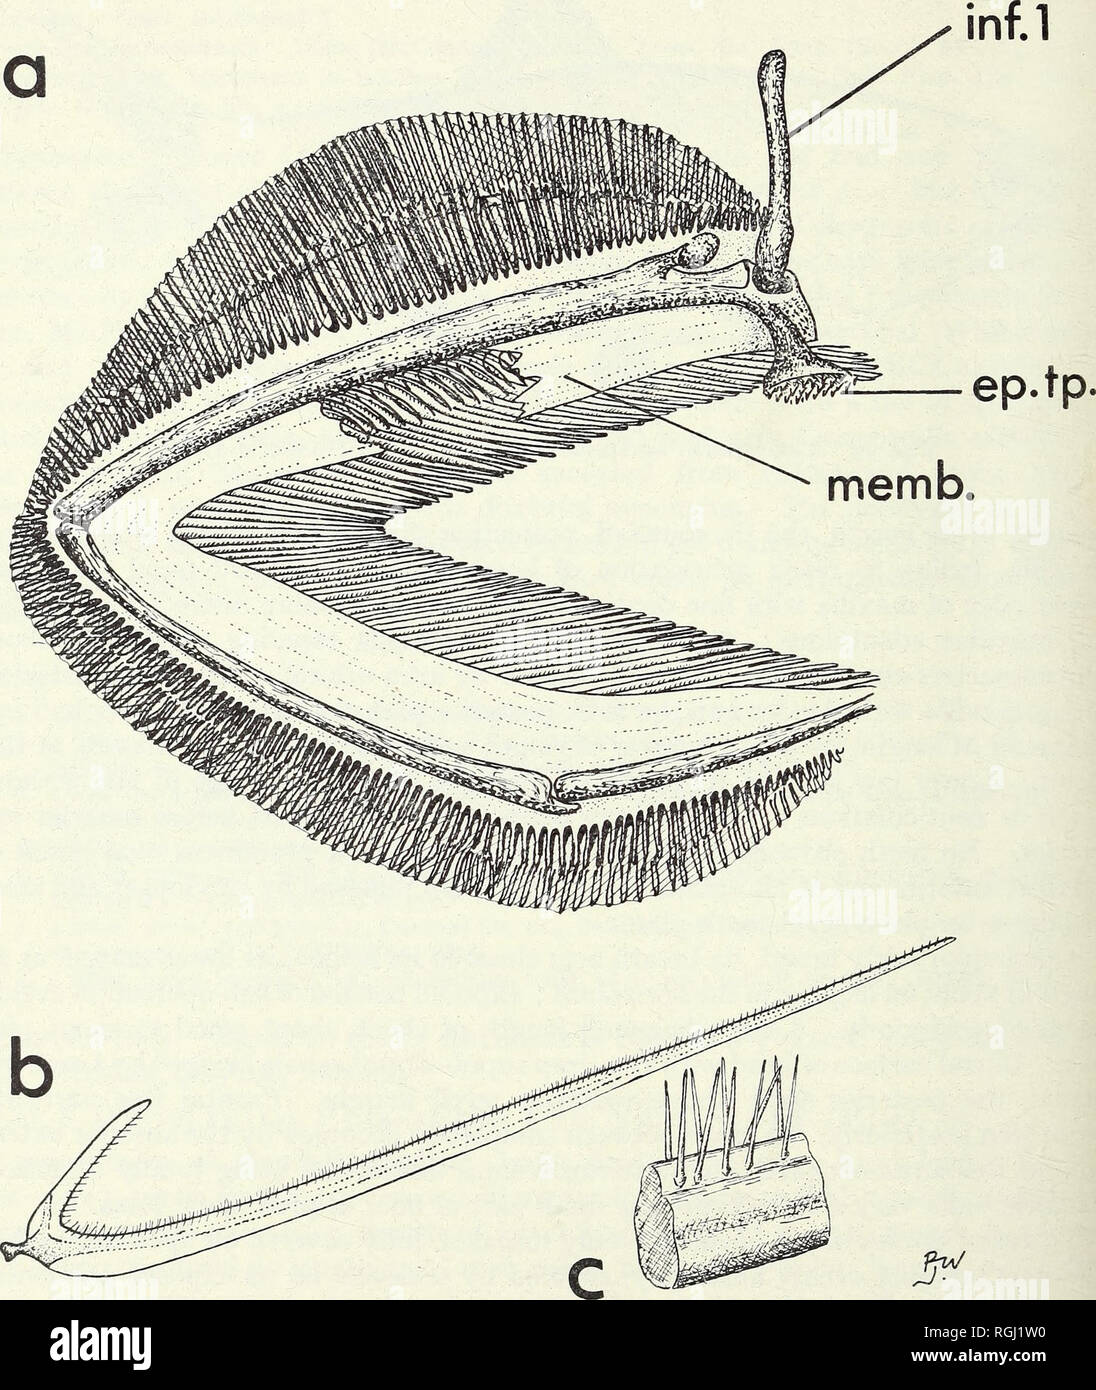 . Bulletin of the British Museum (Natural History). Zoology . Supplement.. no P. J. P. WHITEHEAD. Fig. 40. Gillrakers in Cetengraulis edentulus. a. Inner face of 1st gill arch (left) to show membrane behind recurved arms of gillrakers. inf.i, 1st infra-pharyngobranchial. ep.tp., toothplate fused to epi- branchial. memb., membrane. Specimen from batch a of material studied. b. Individual gillraker from about mid-point of epibranchial. c. Portion of gillraker showing double series of fine setae on either side of inner edge.. Please note that these images are extracted from scanned page images th Stock Photo